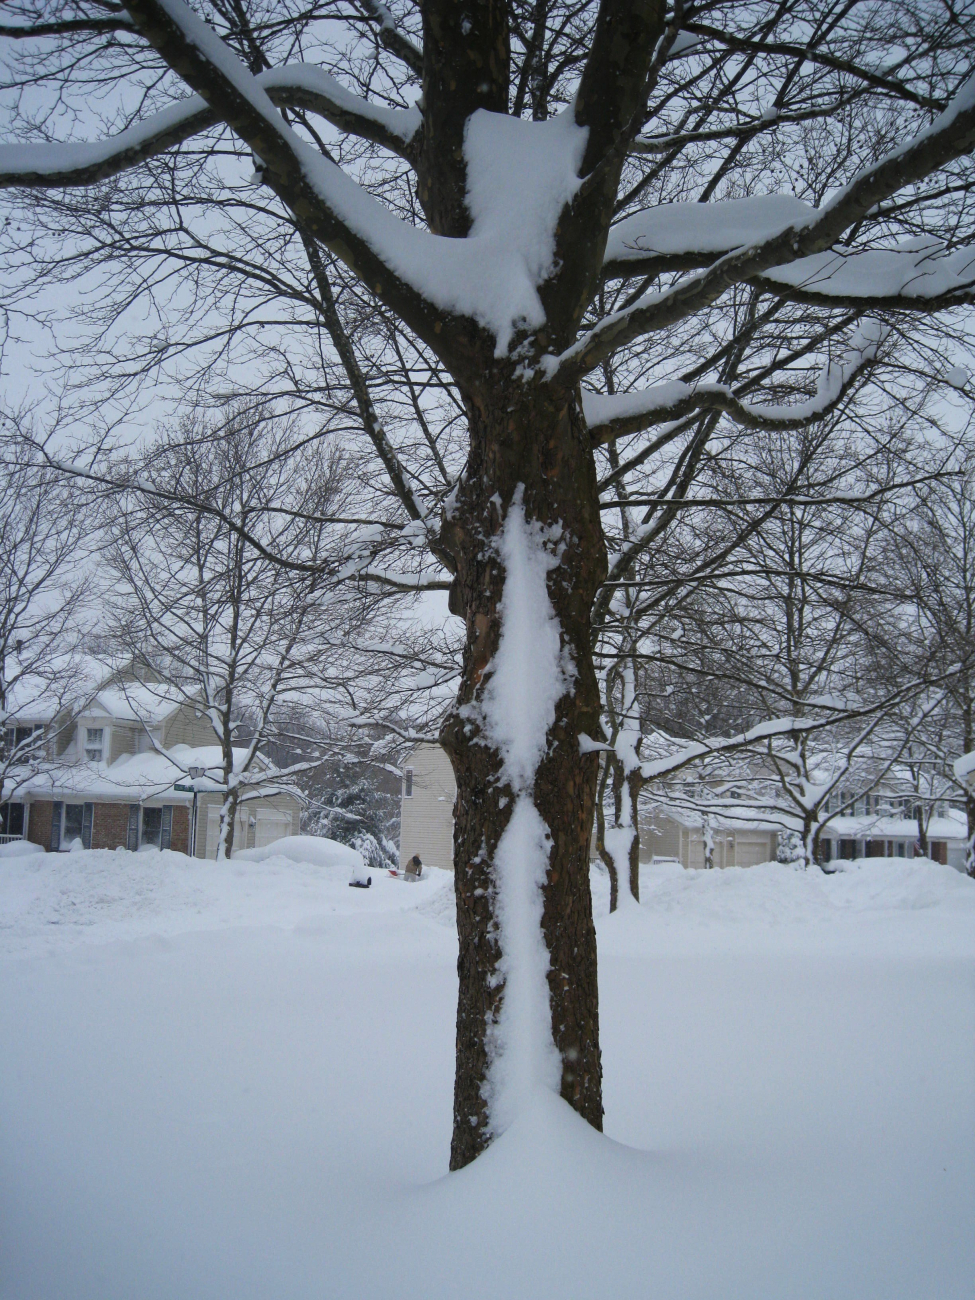 Snow on tree shows prevailing wind direction during storm